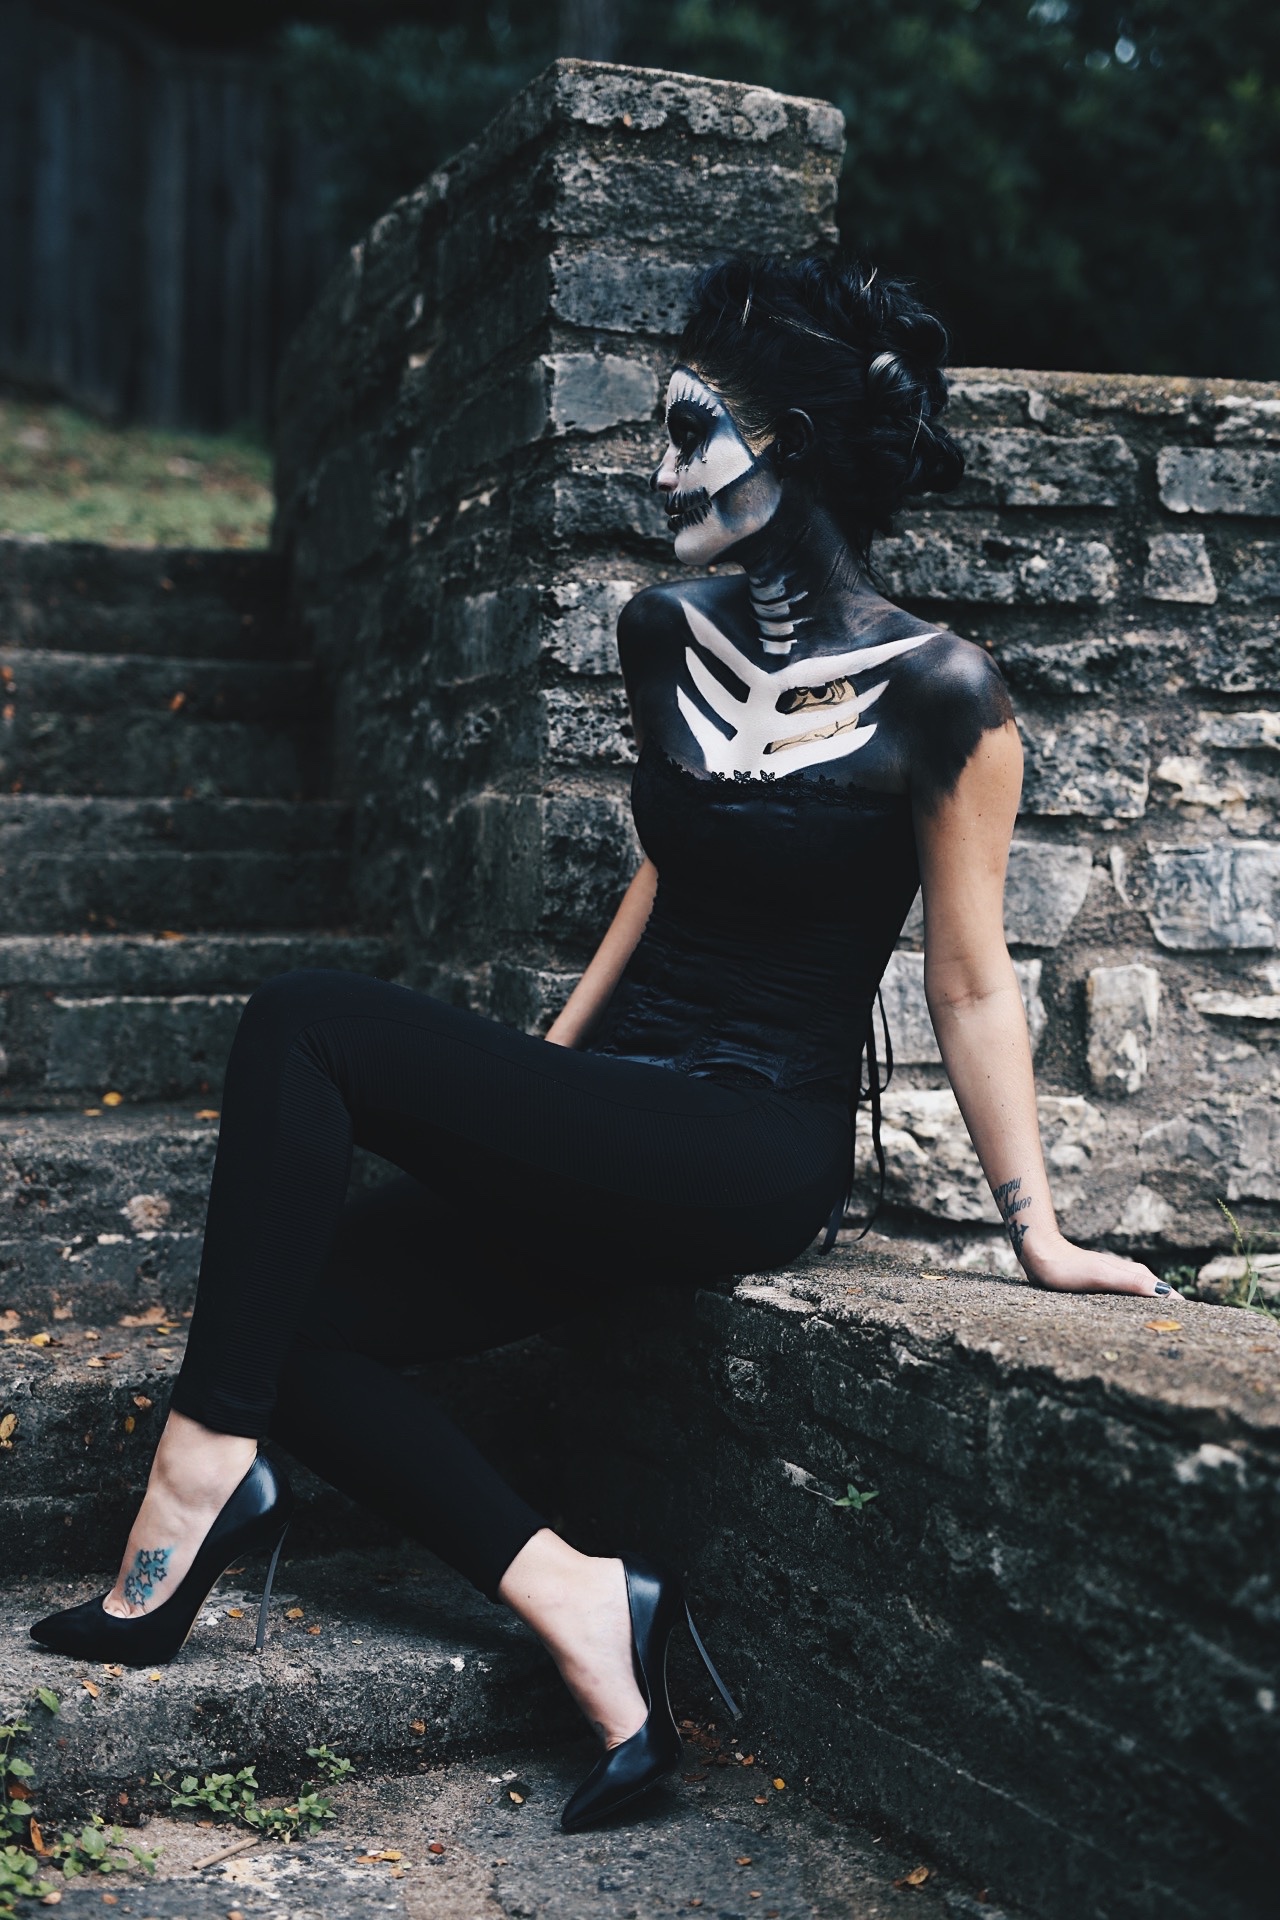 Austin Blogger DTKAustin shares her sexy skeleton costume with full face and body paint for Halloween. | halloween makeup ideas | halloween costume ideas | how to do makeup for halloween | halloween inspired makeup ideas | makeup tips for halloween || Dressed to Kill